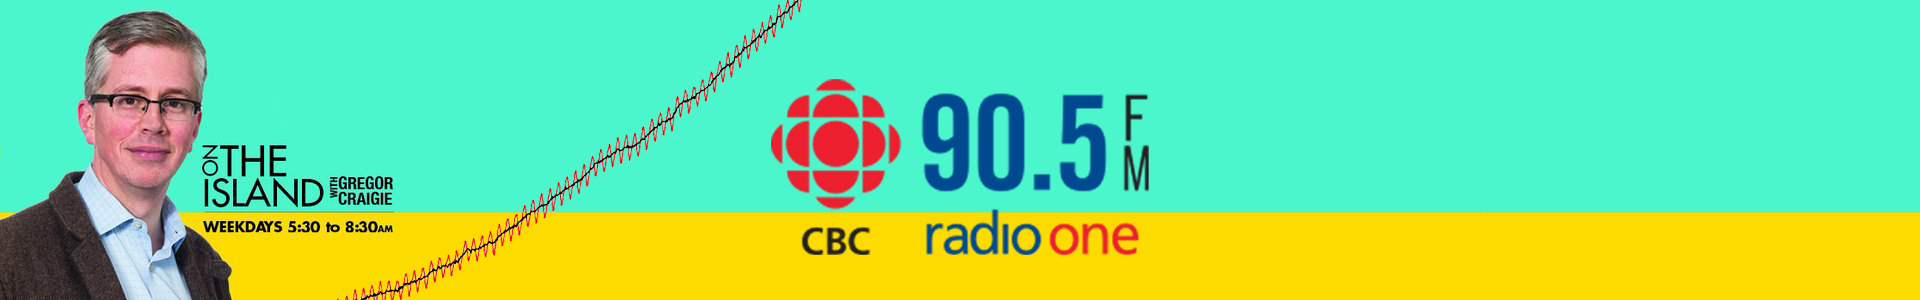 banner with image of gregor craigie, keeling curve and logo for CBC Radio One 90.5 FM